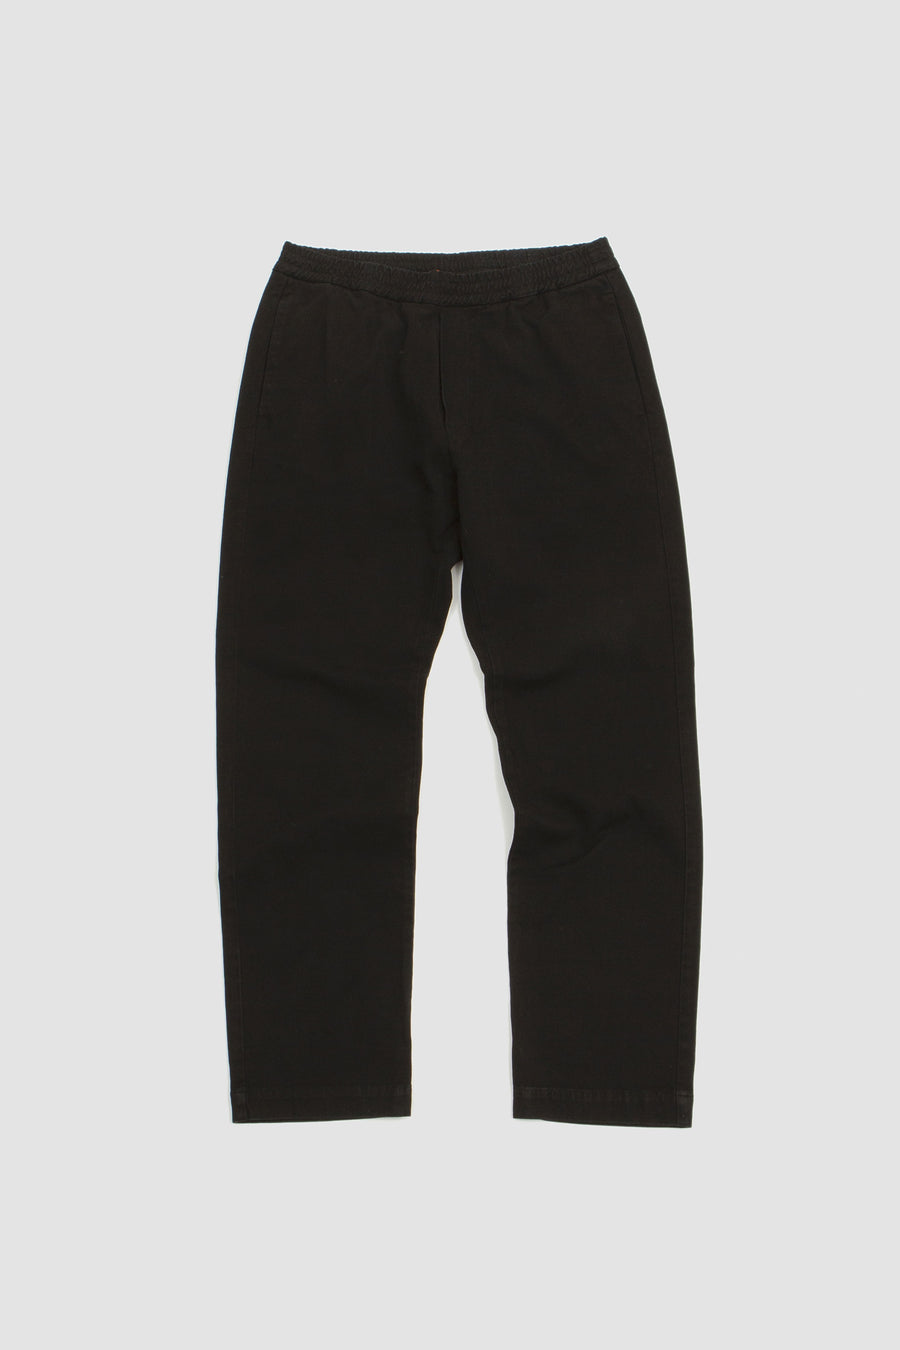 Our Legacy - Work Shop Sweat Shorts Nero